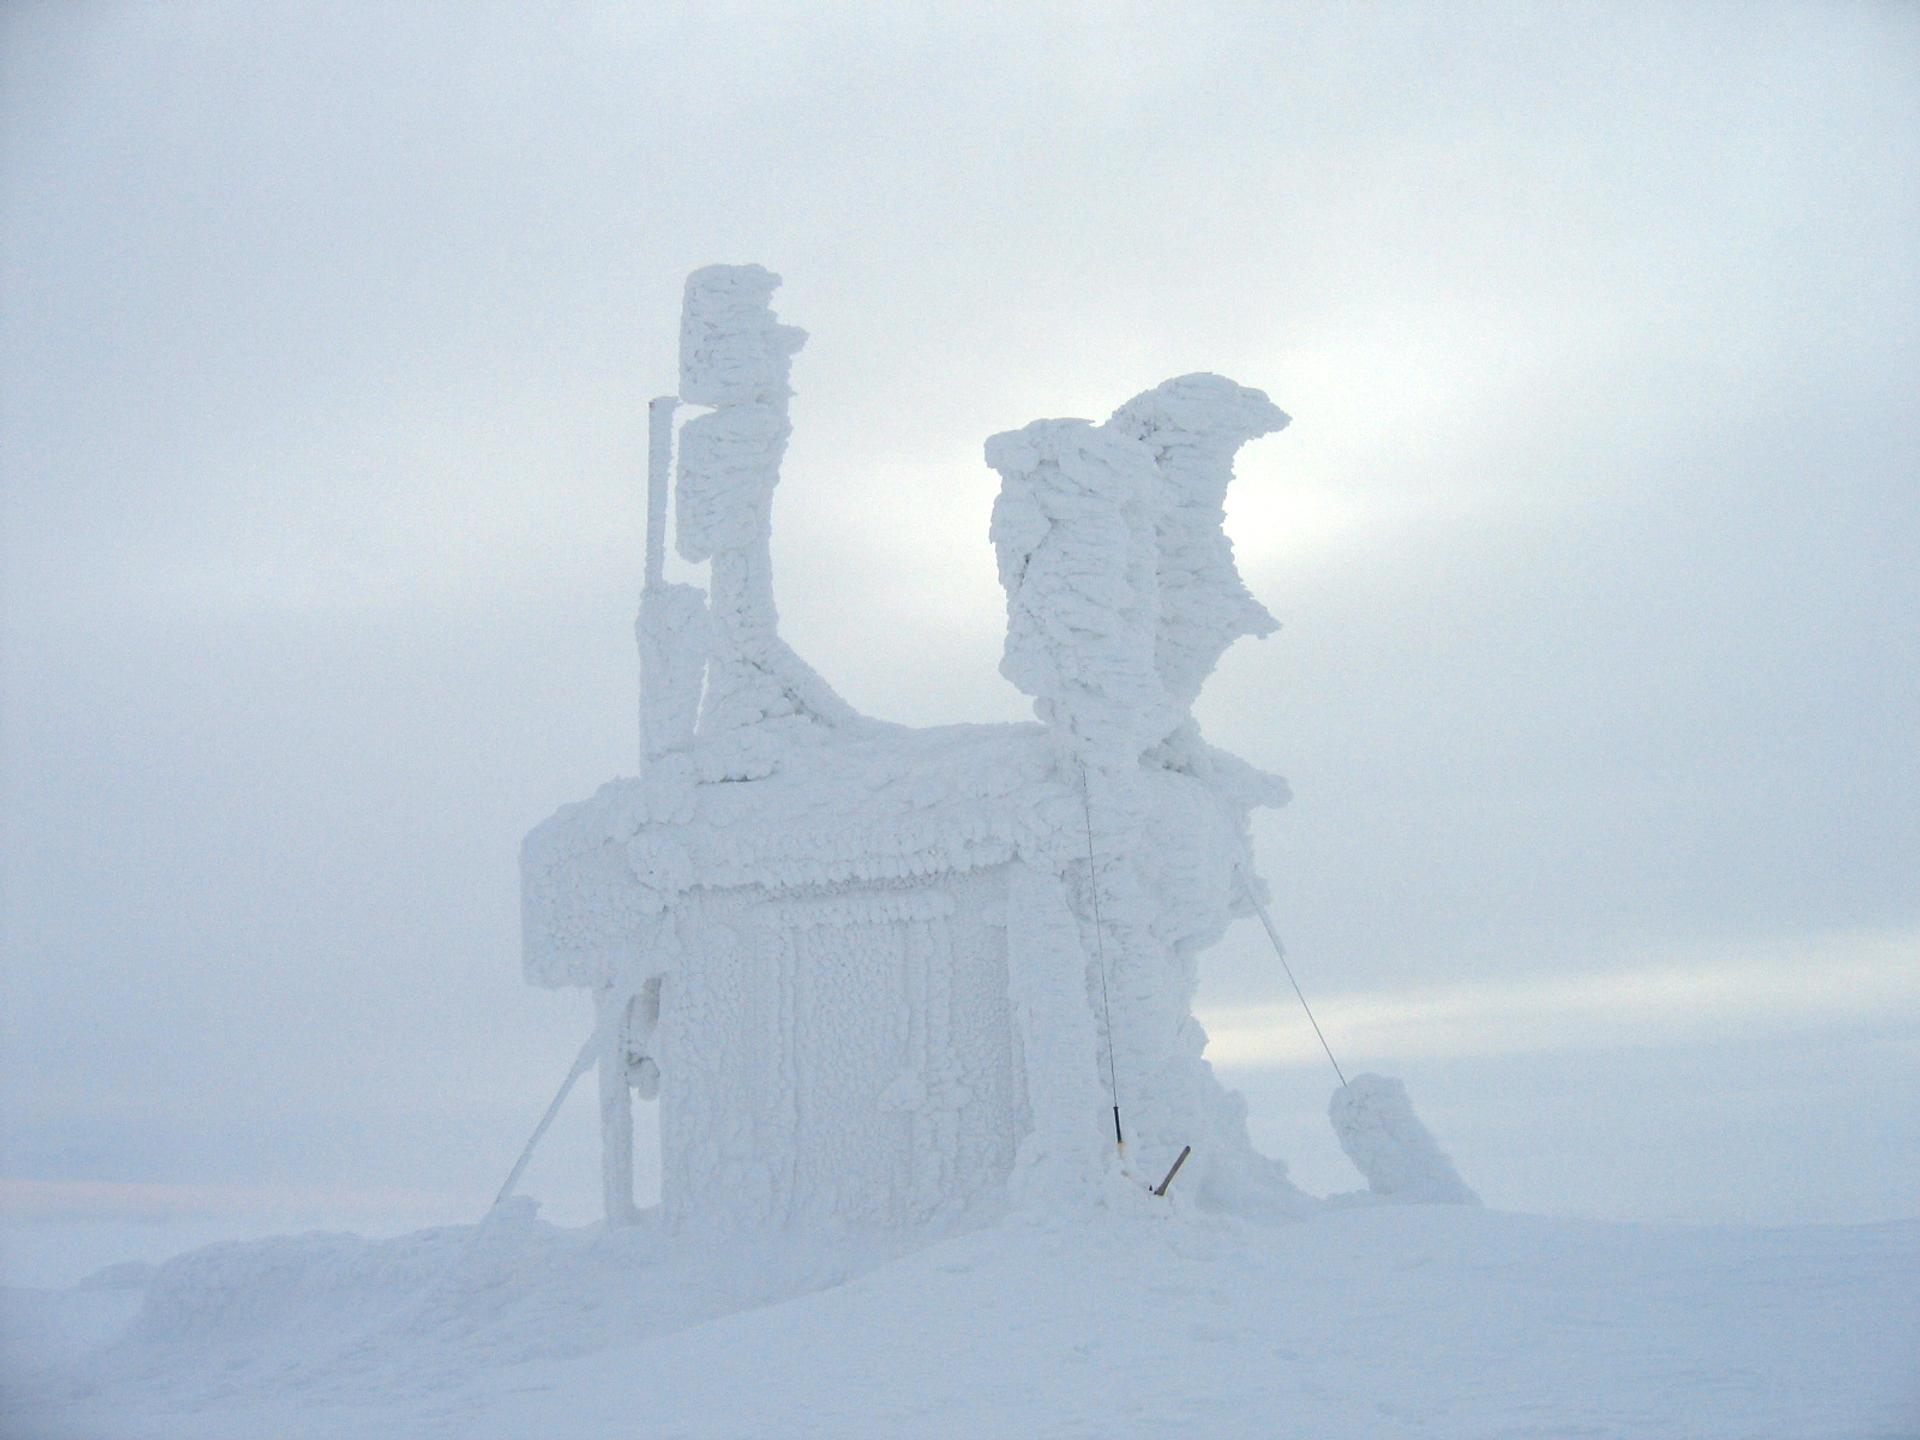 A telecom station in Norway covered in snow